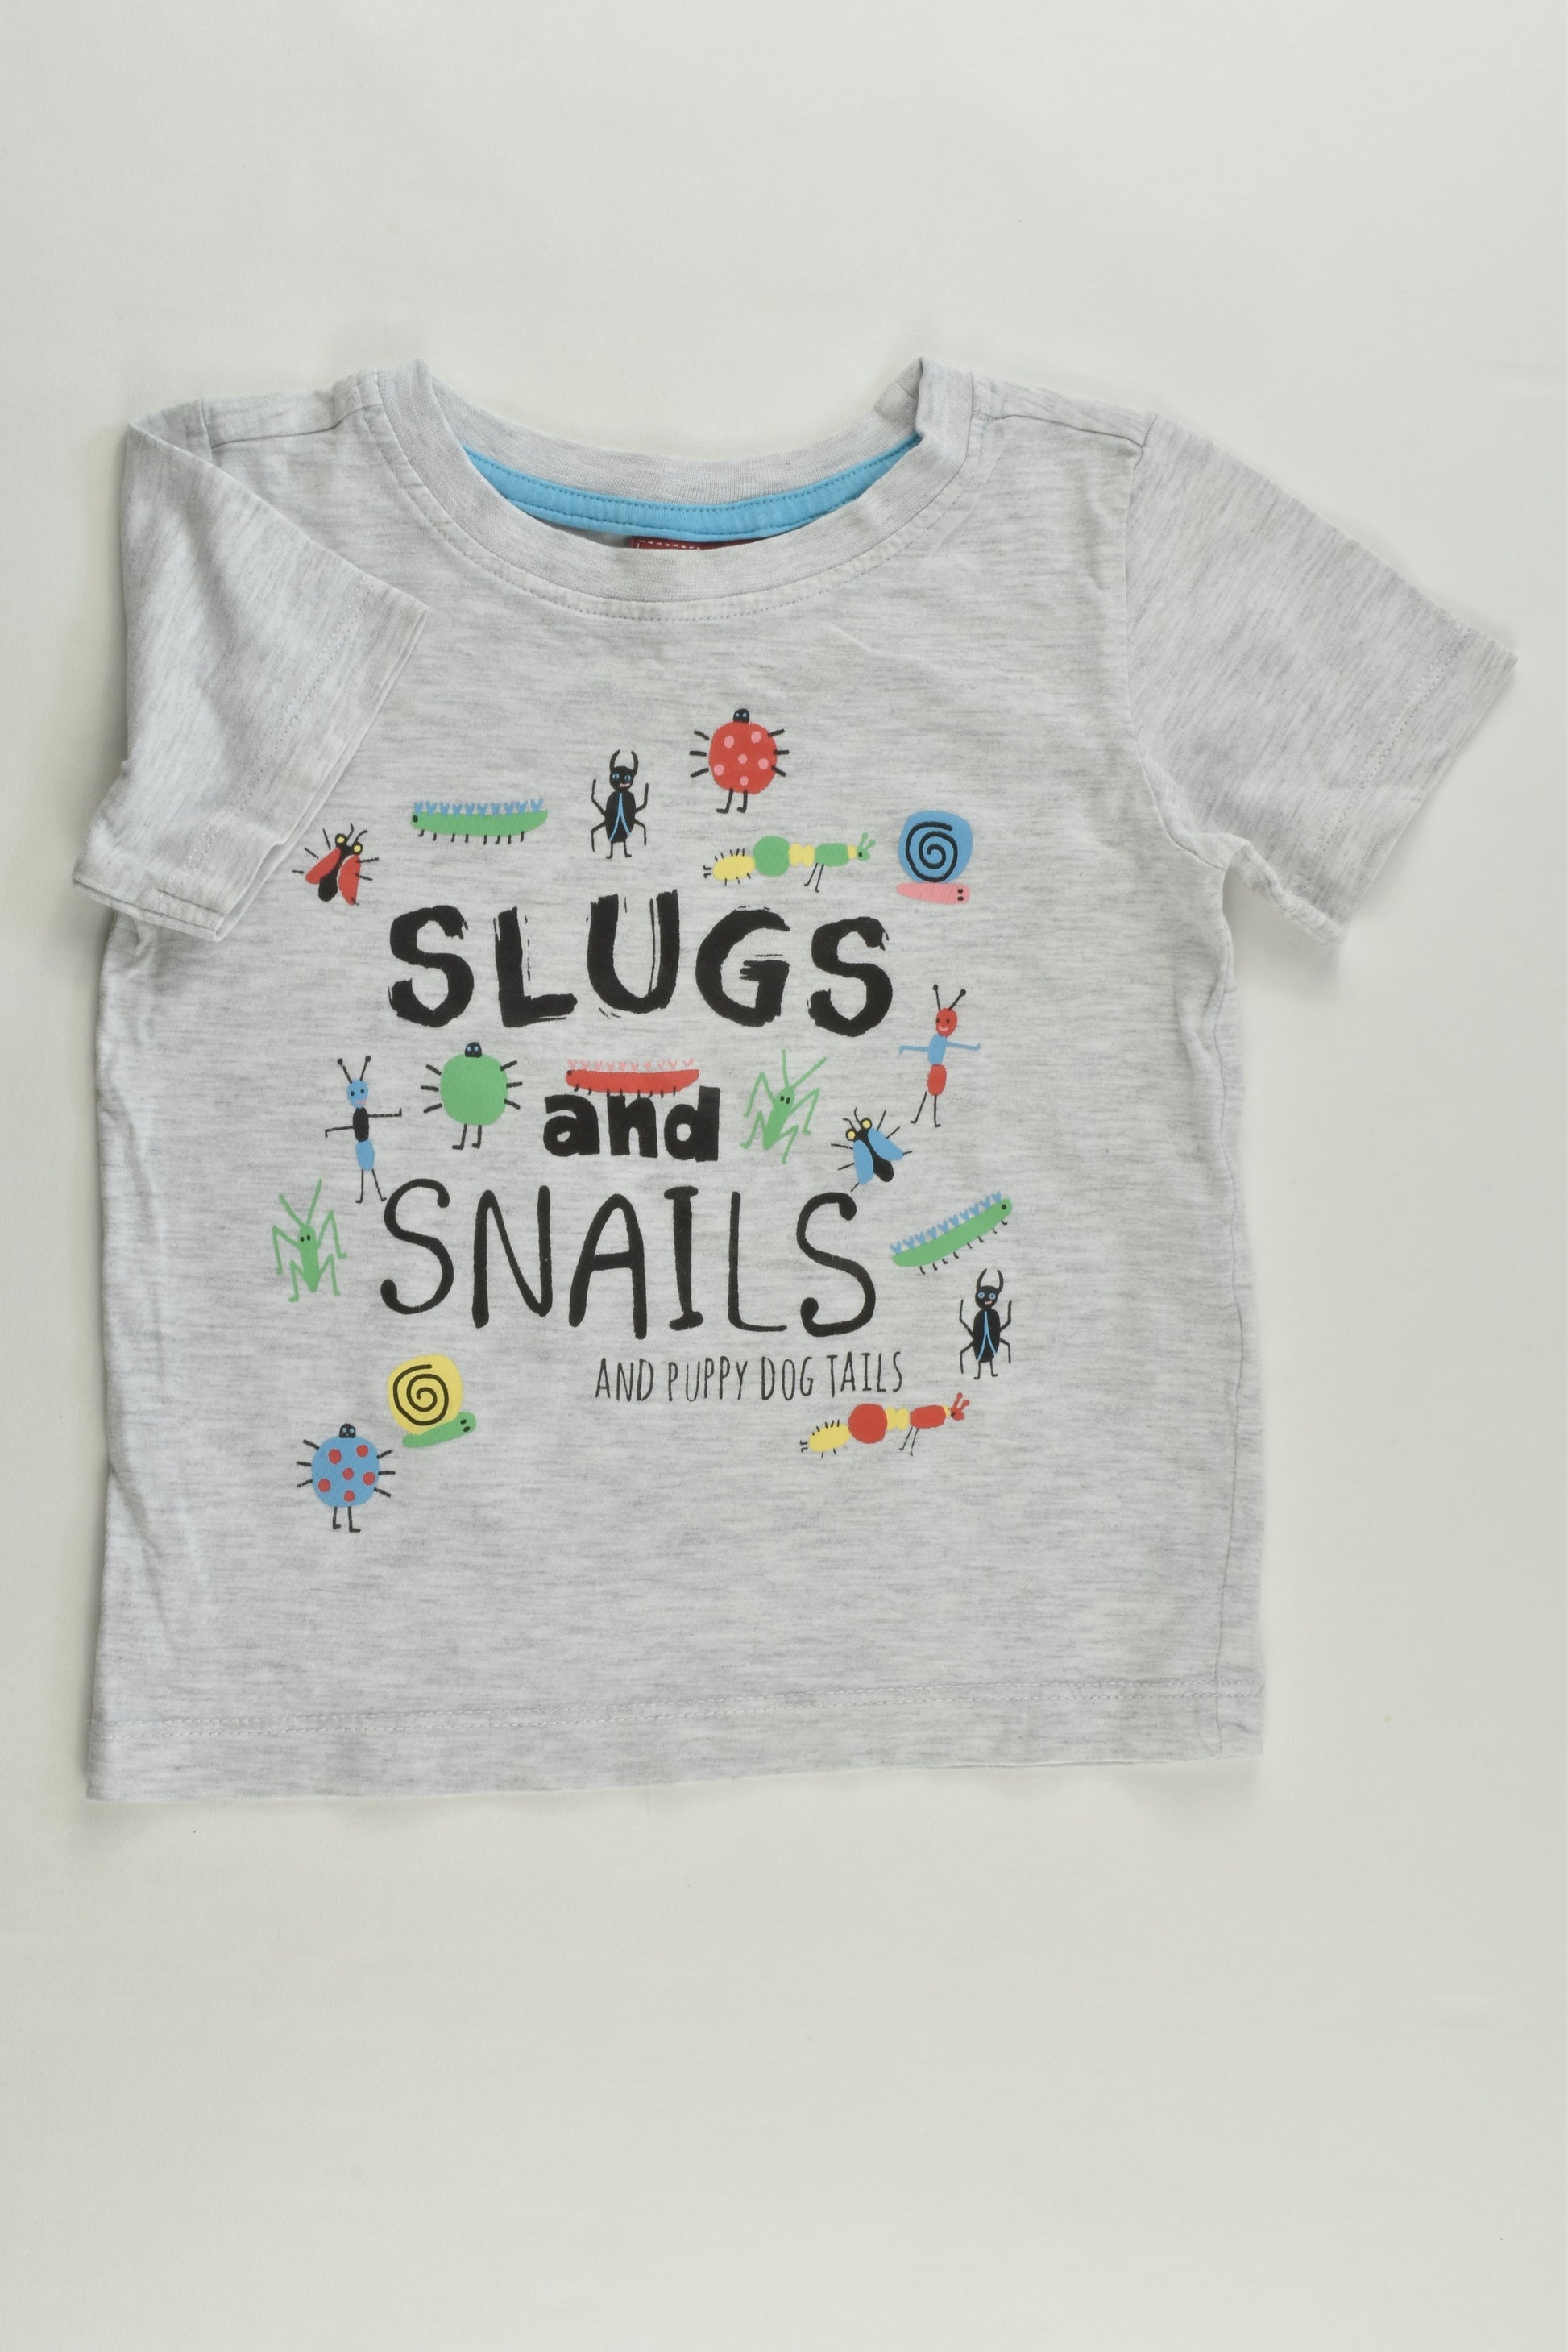 Sprout Size 1 'Slugs and Snails' T-shirt